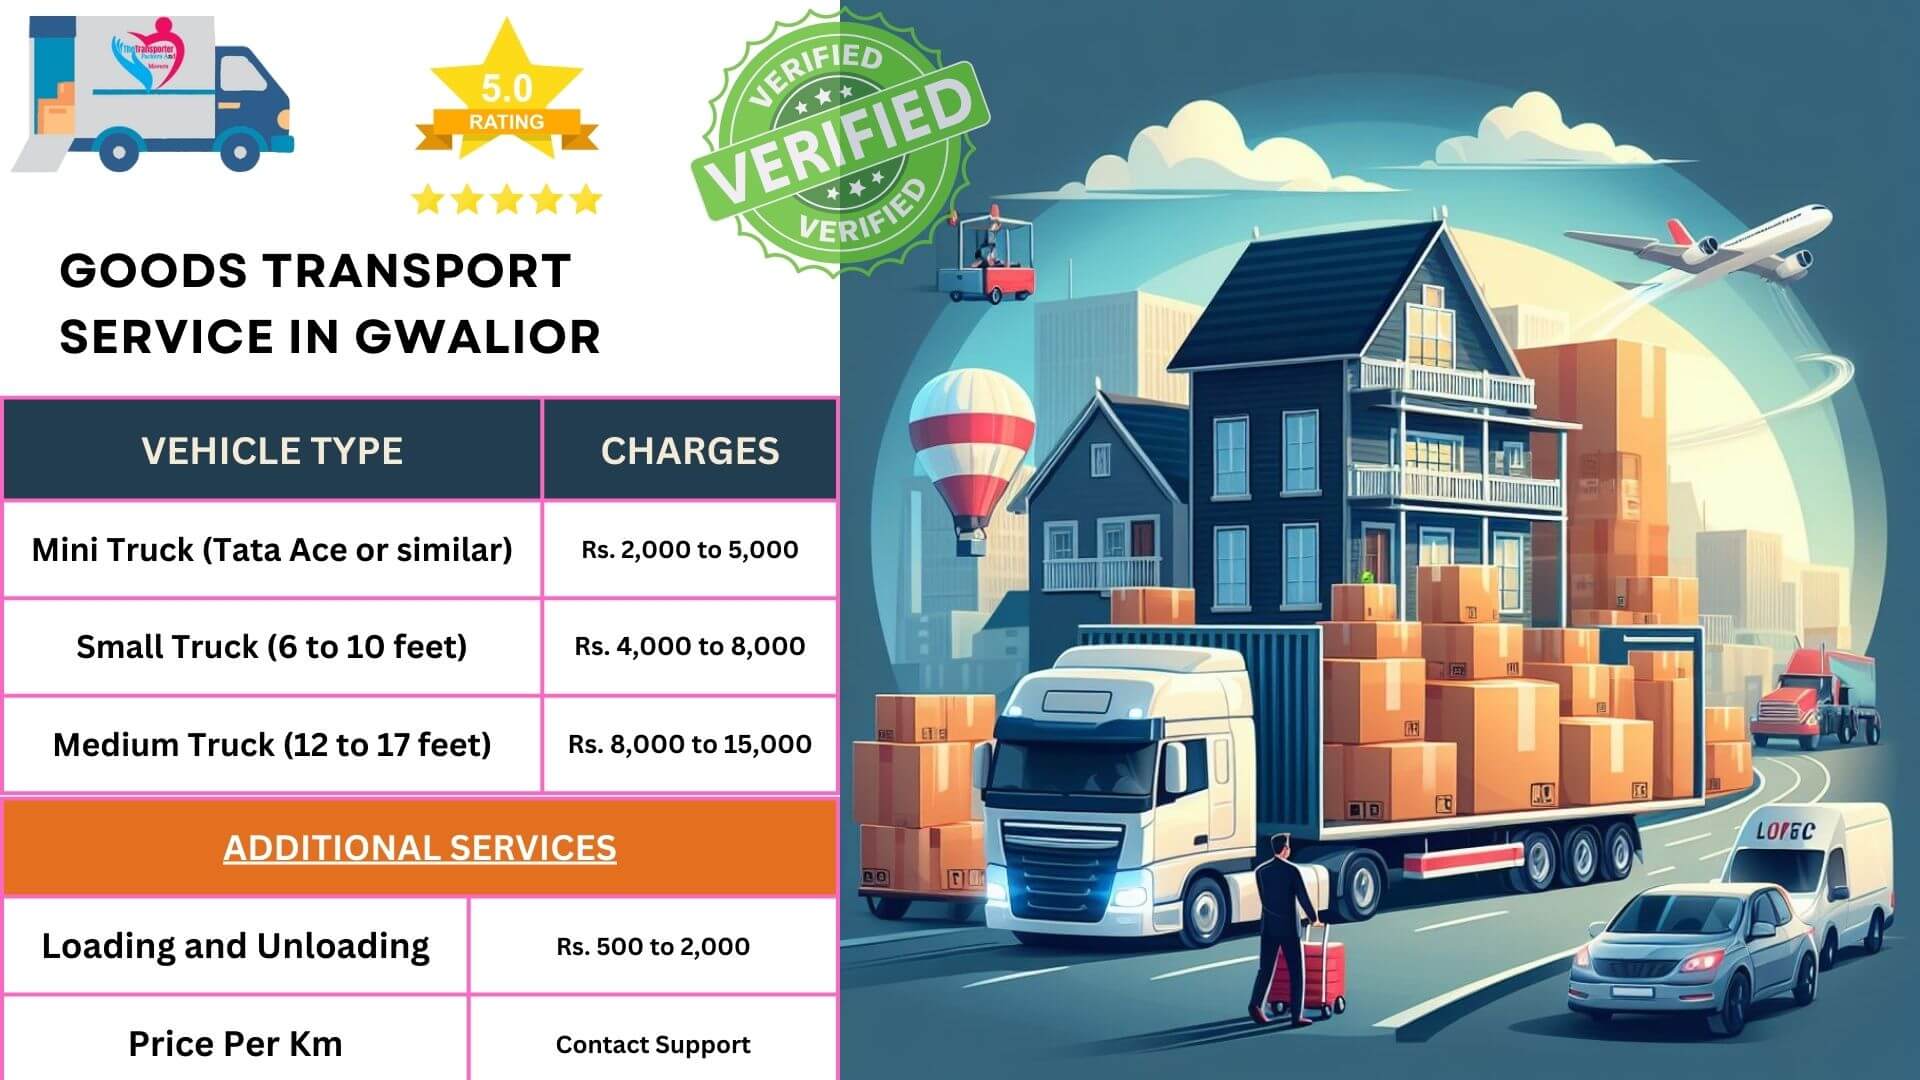 Goods transport services in Gwalior